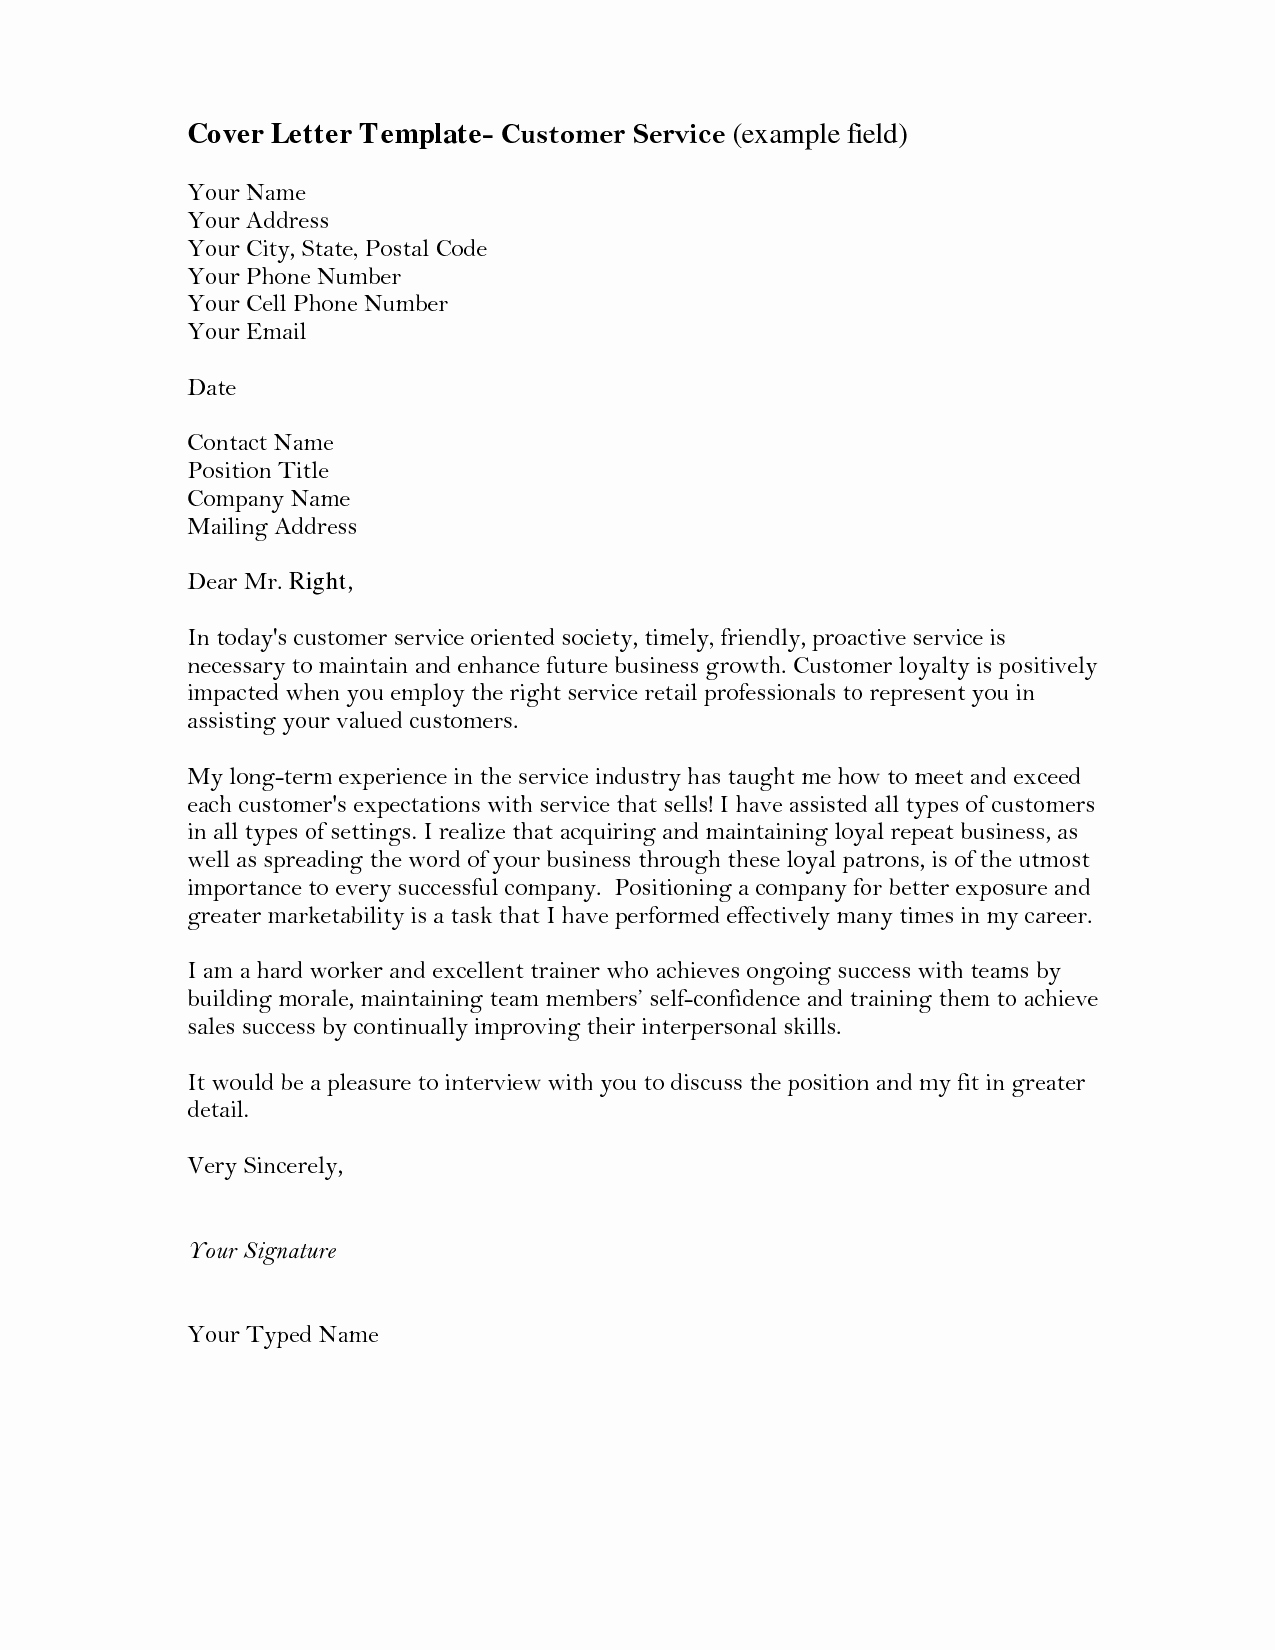 Sample Business Letters to Customers Beautiful 10 Customer Service Cover Letter Sample 2016